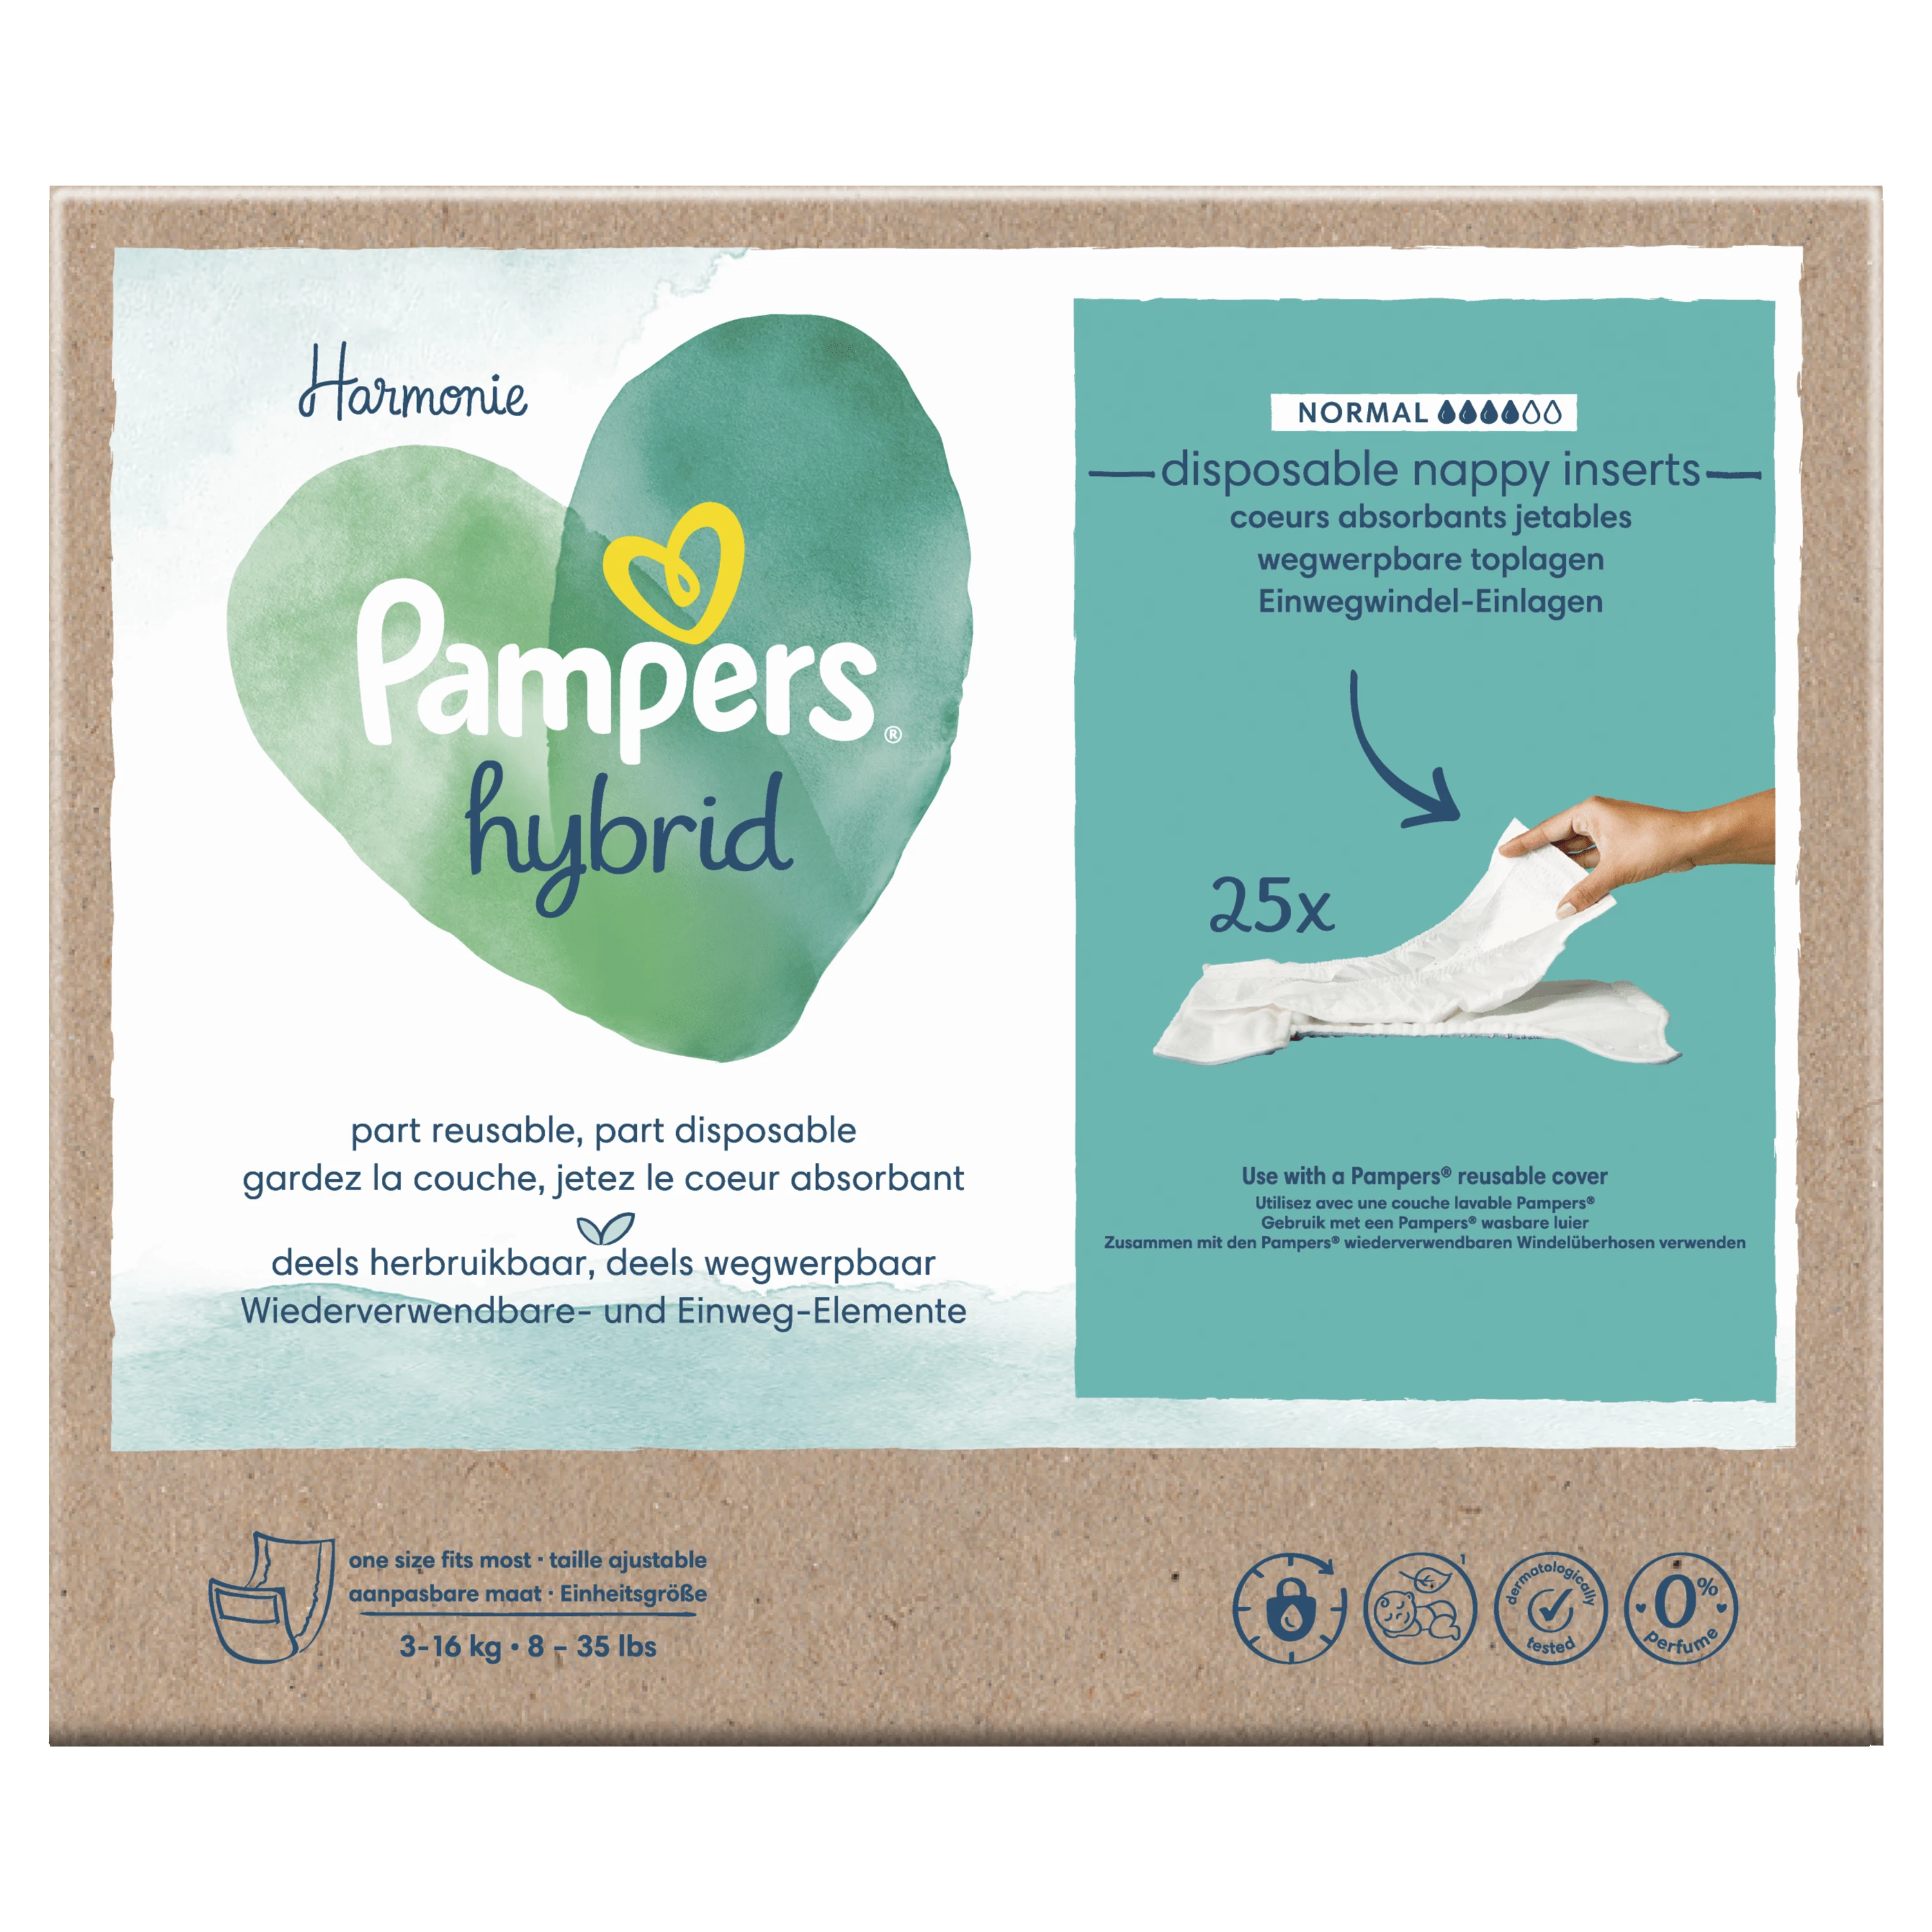 Pampers Hybrid 25 Insert Norma